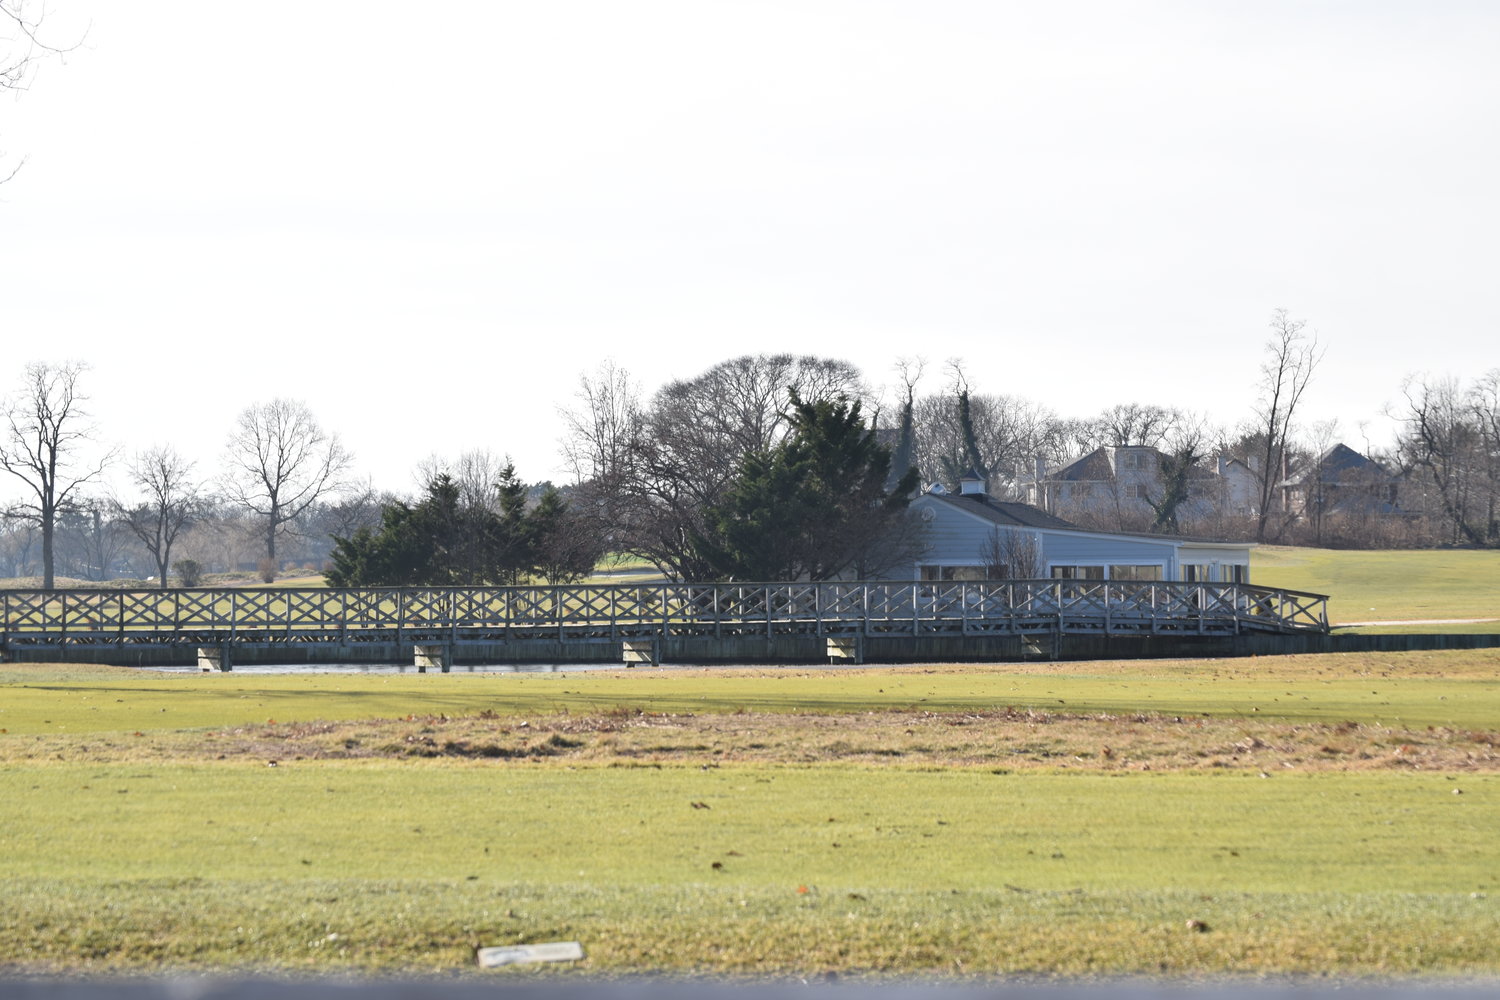 The Woodmere Club golf course lies dormant for the winter, but the legal wrangling goes on: Its owners have filed a second lawsuit, this one against the Village of Woodsburgh.